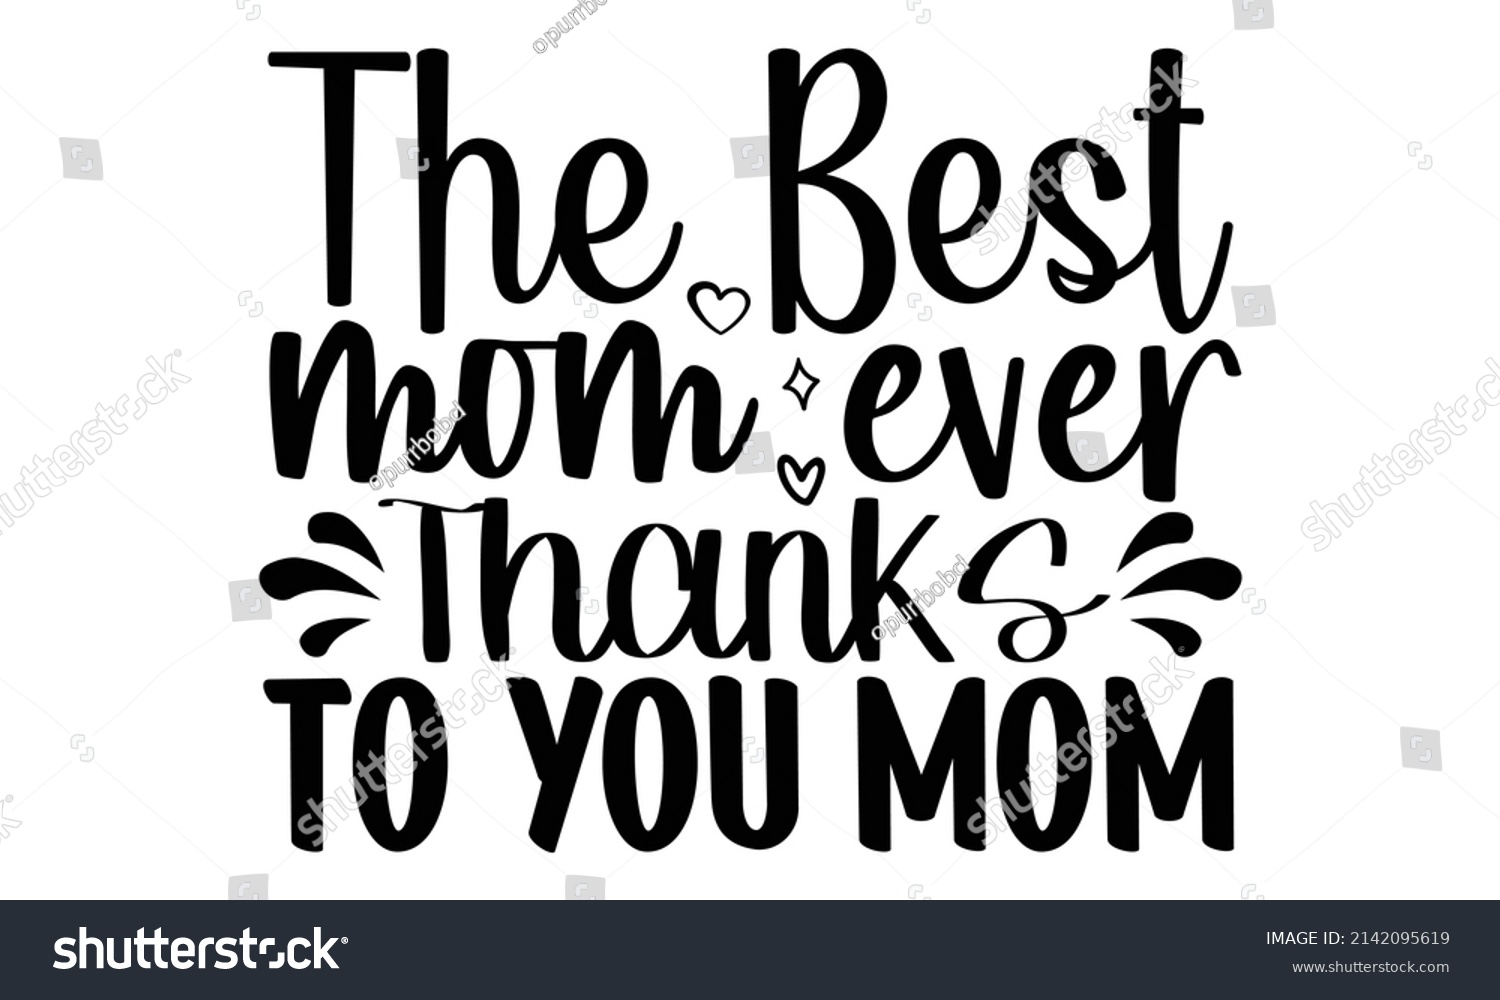 SVG of The best mom ever thanks to you mom- Mother's day t-shirt design, Hand drawn lettering phrase, Calligraphy t-shirt design, Isolated on white background, Handwritten vector sign, SVG, EPS 10 svg